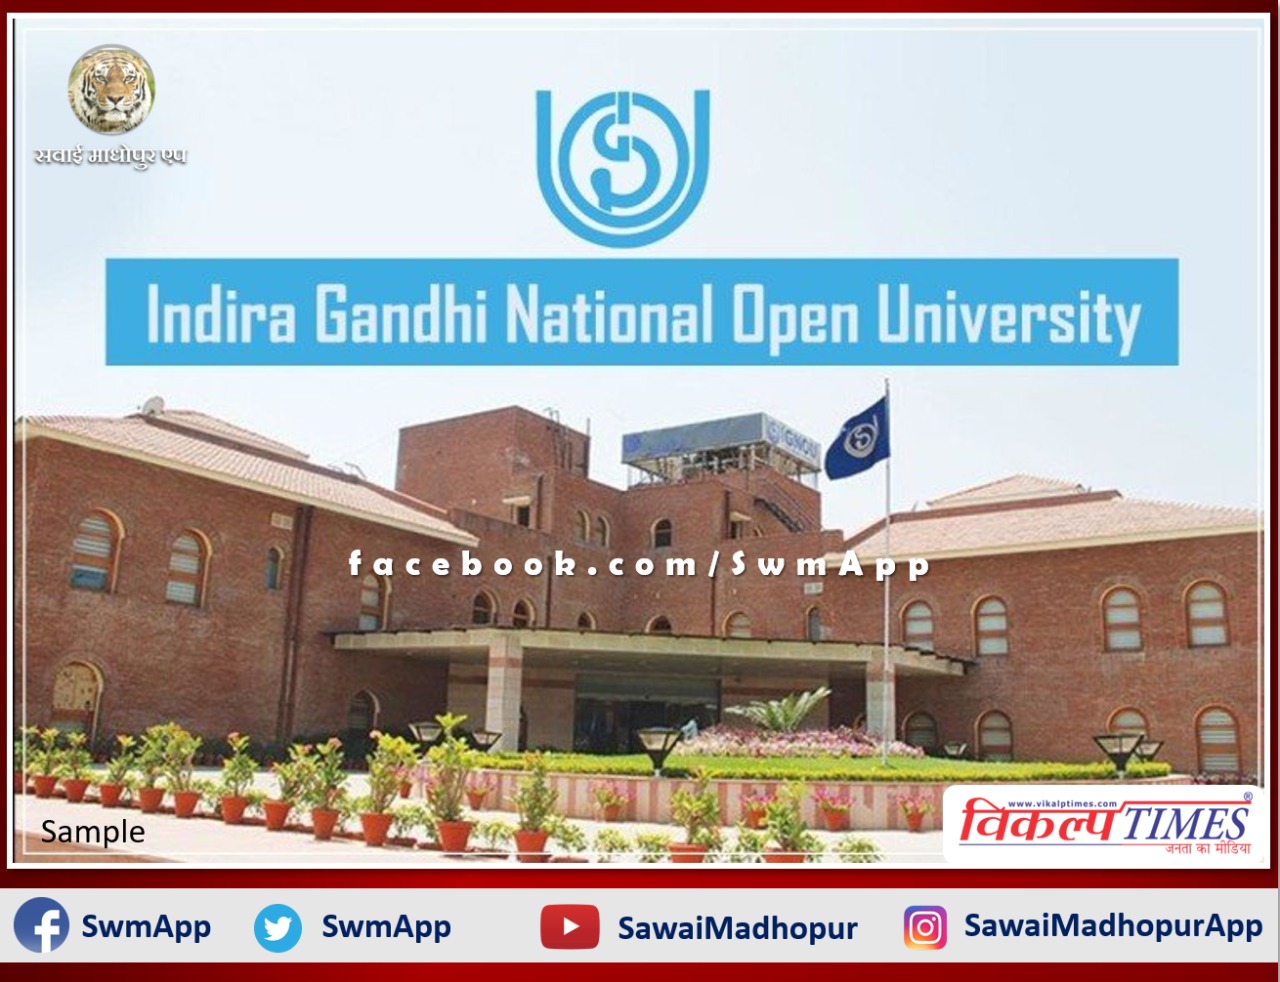 IGNOU examinations to be held from March 4 in sawai madhopur pg college